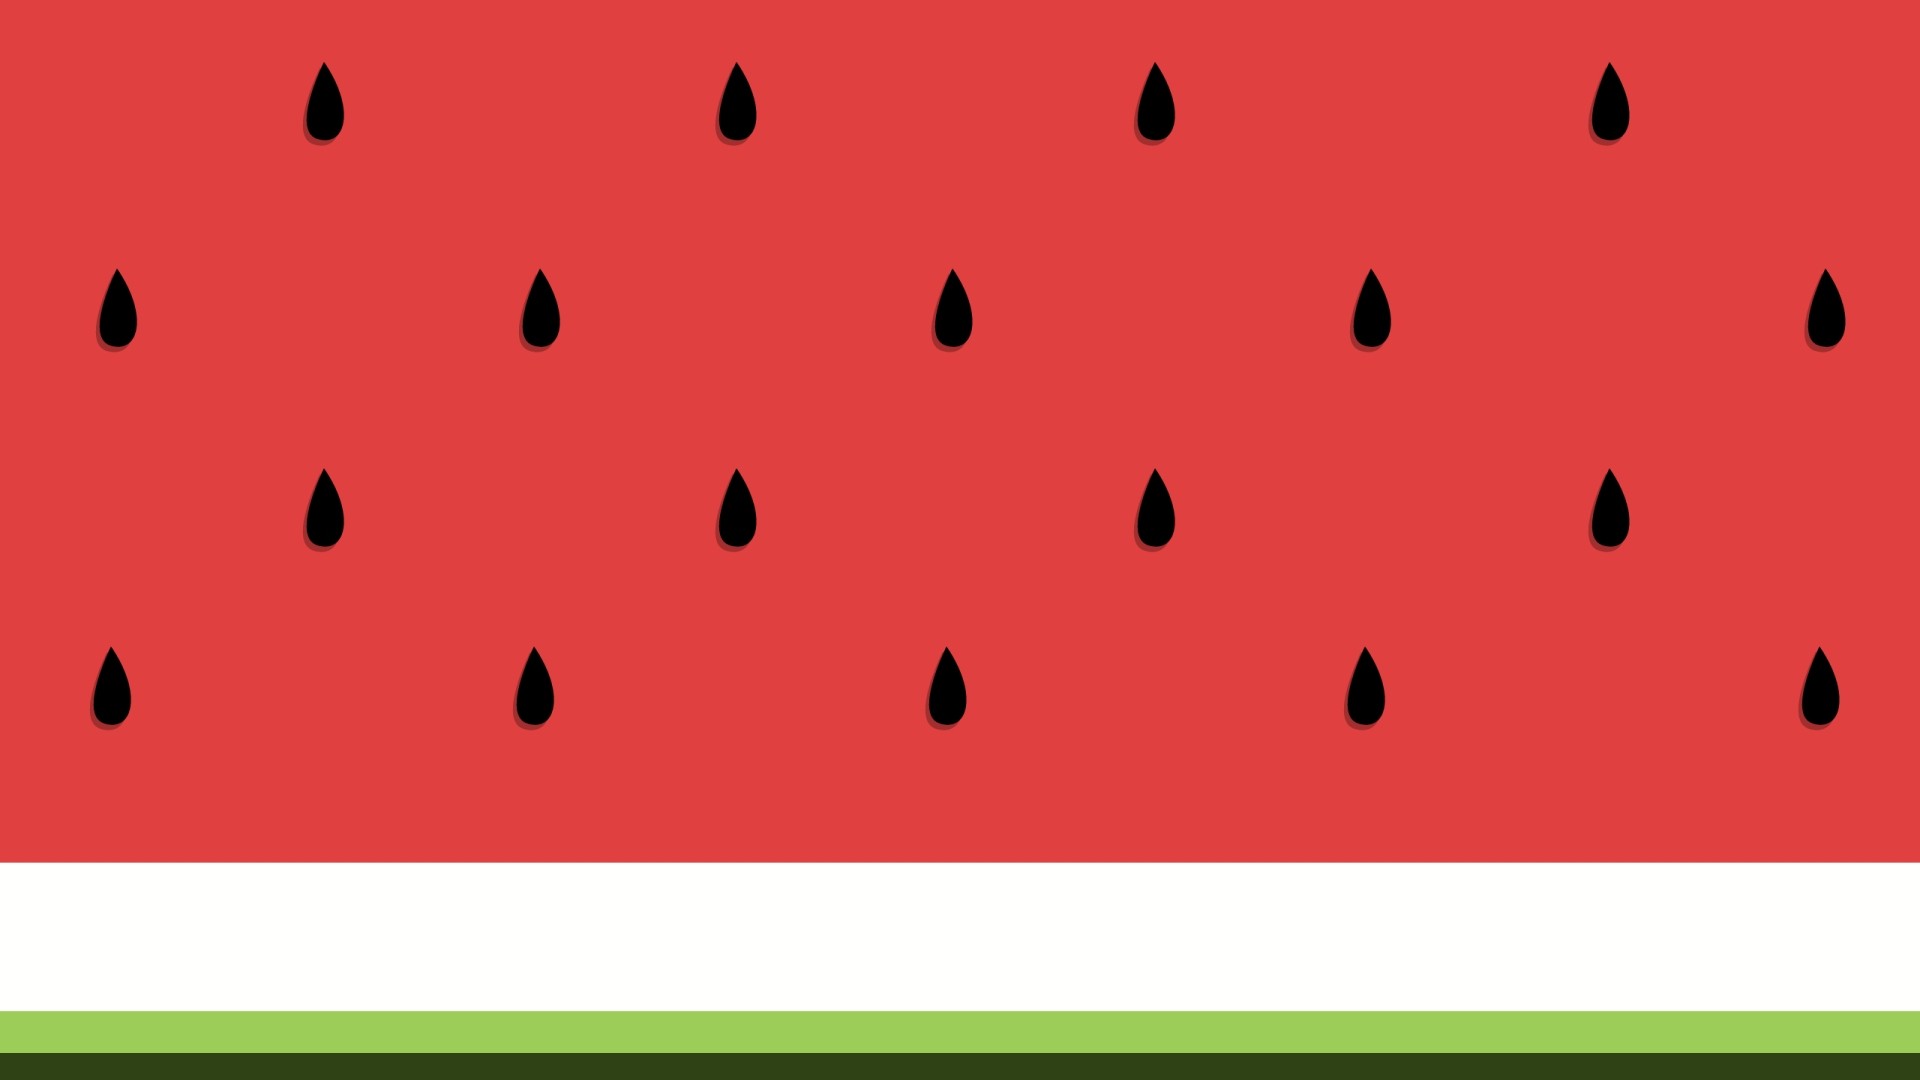 General 1920x1080 minimalism abstract digital art watermelons lines red white green fruit imagination